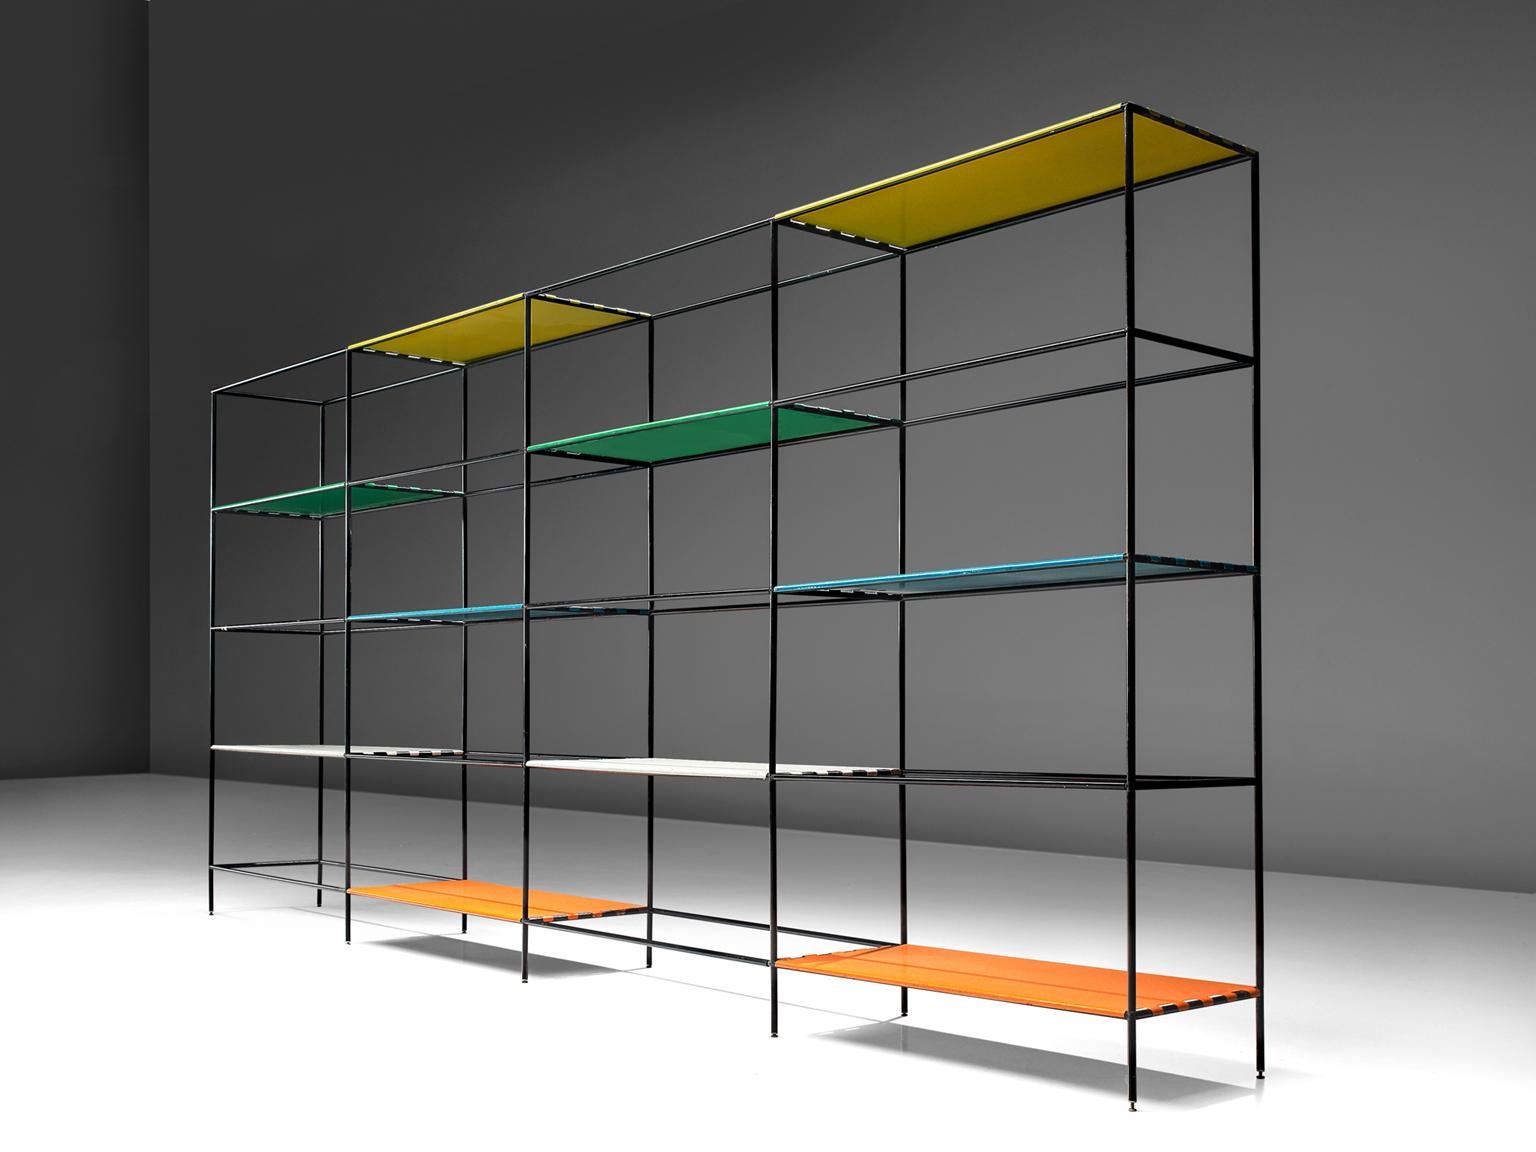 Poul Cadovius for Royal System, shelving unit, steel and mulitcolored glass, Denmark, 1960

This minimalist shelving unit was designed by Poul Cadovius. The modular system exists of a black lacquered metal frame. Colorful metal shelves are adding